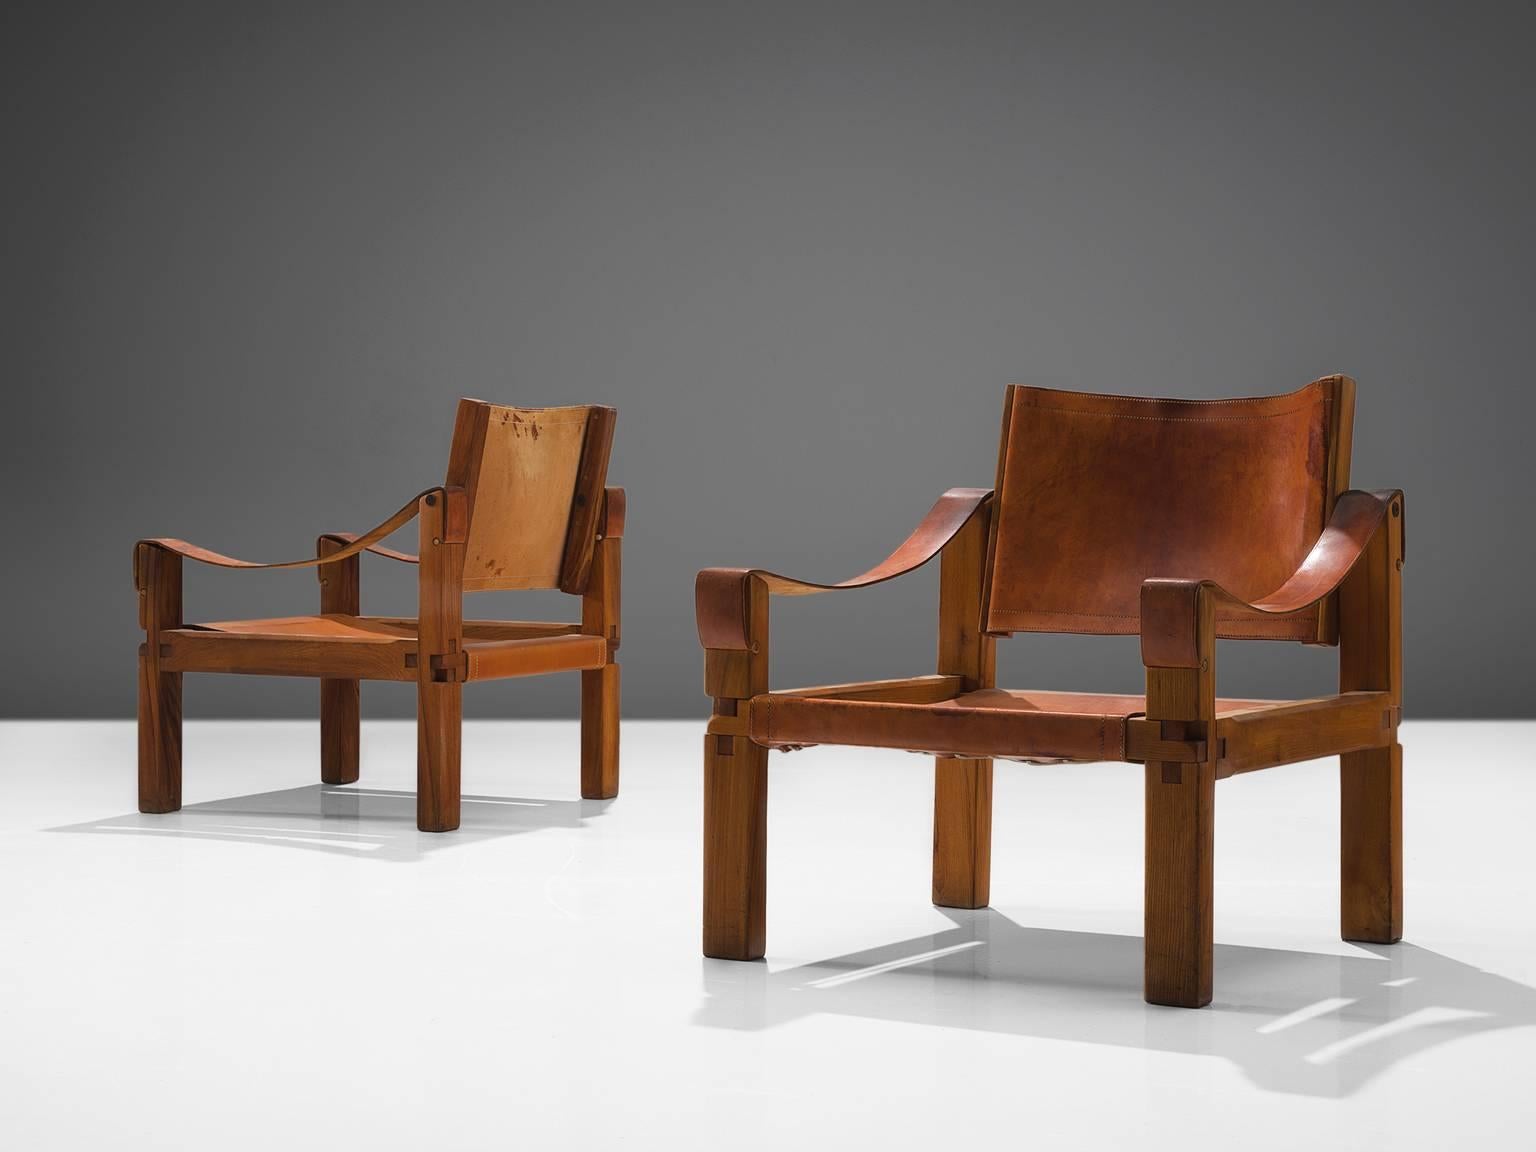 Pierre Chapo, two armchairs, model S10X, elm and leather, France, ca. 1964.

This set of two lounge chairs is designed by Pierre Chapo. These comfortable armchairs in solid elmwood and cognac saddle leather of this specific set features a wonderful